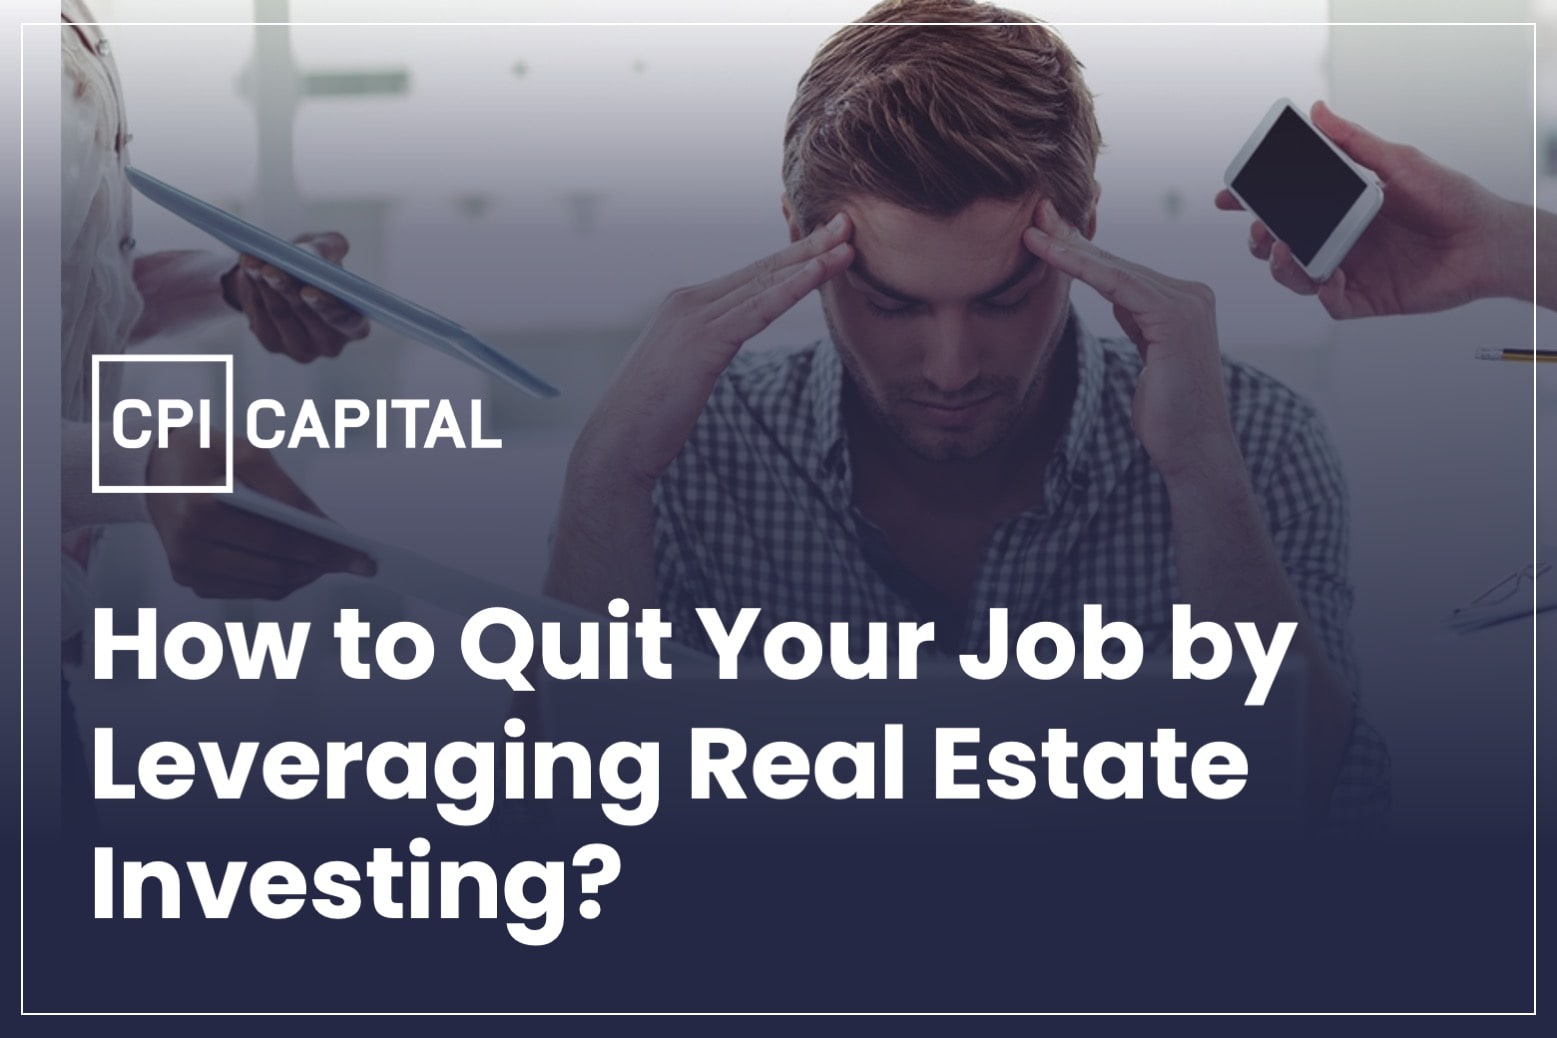 How to Quit Your Job by Leveraging Real Estate Investing